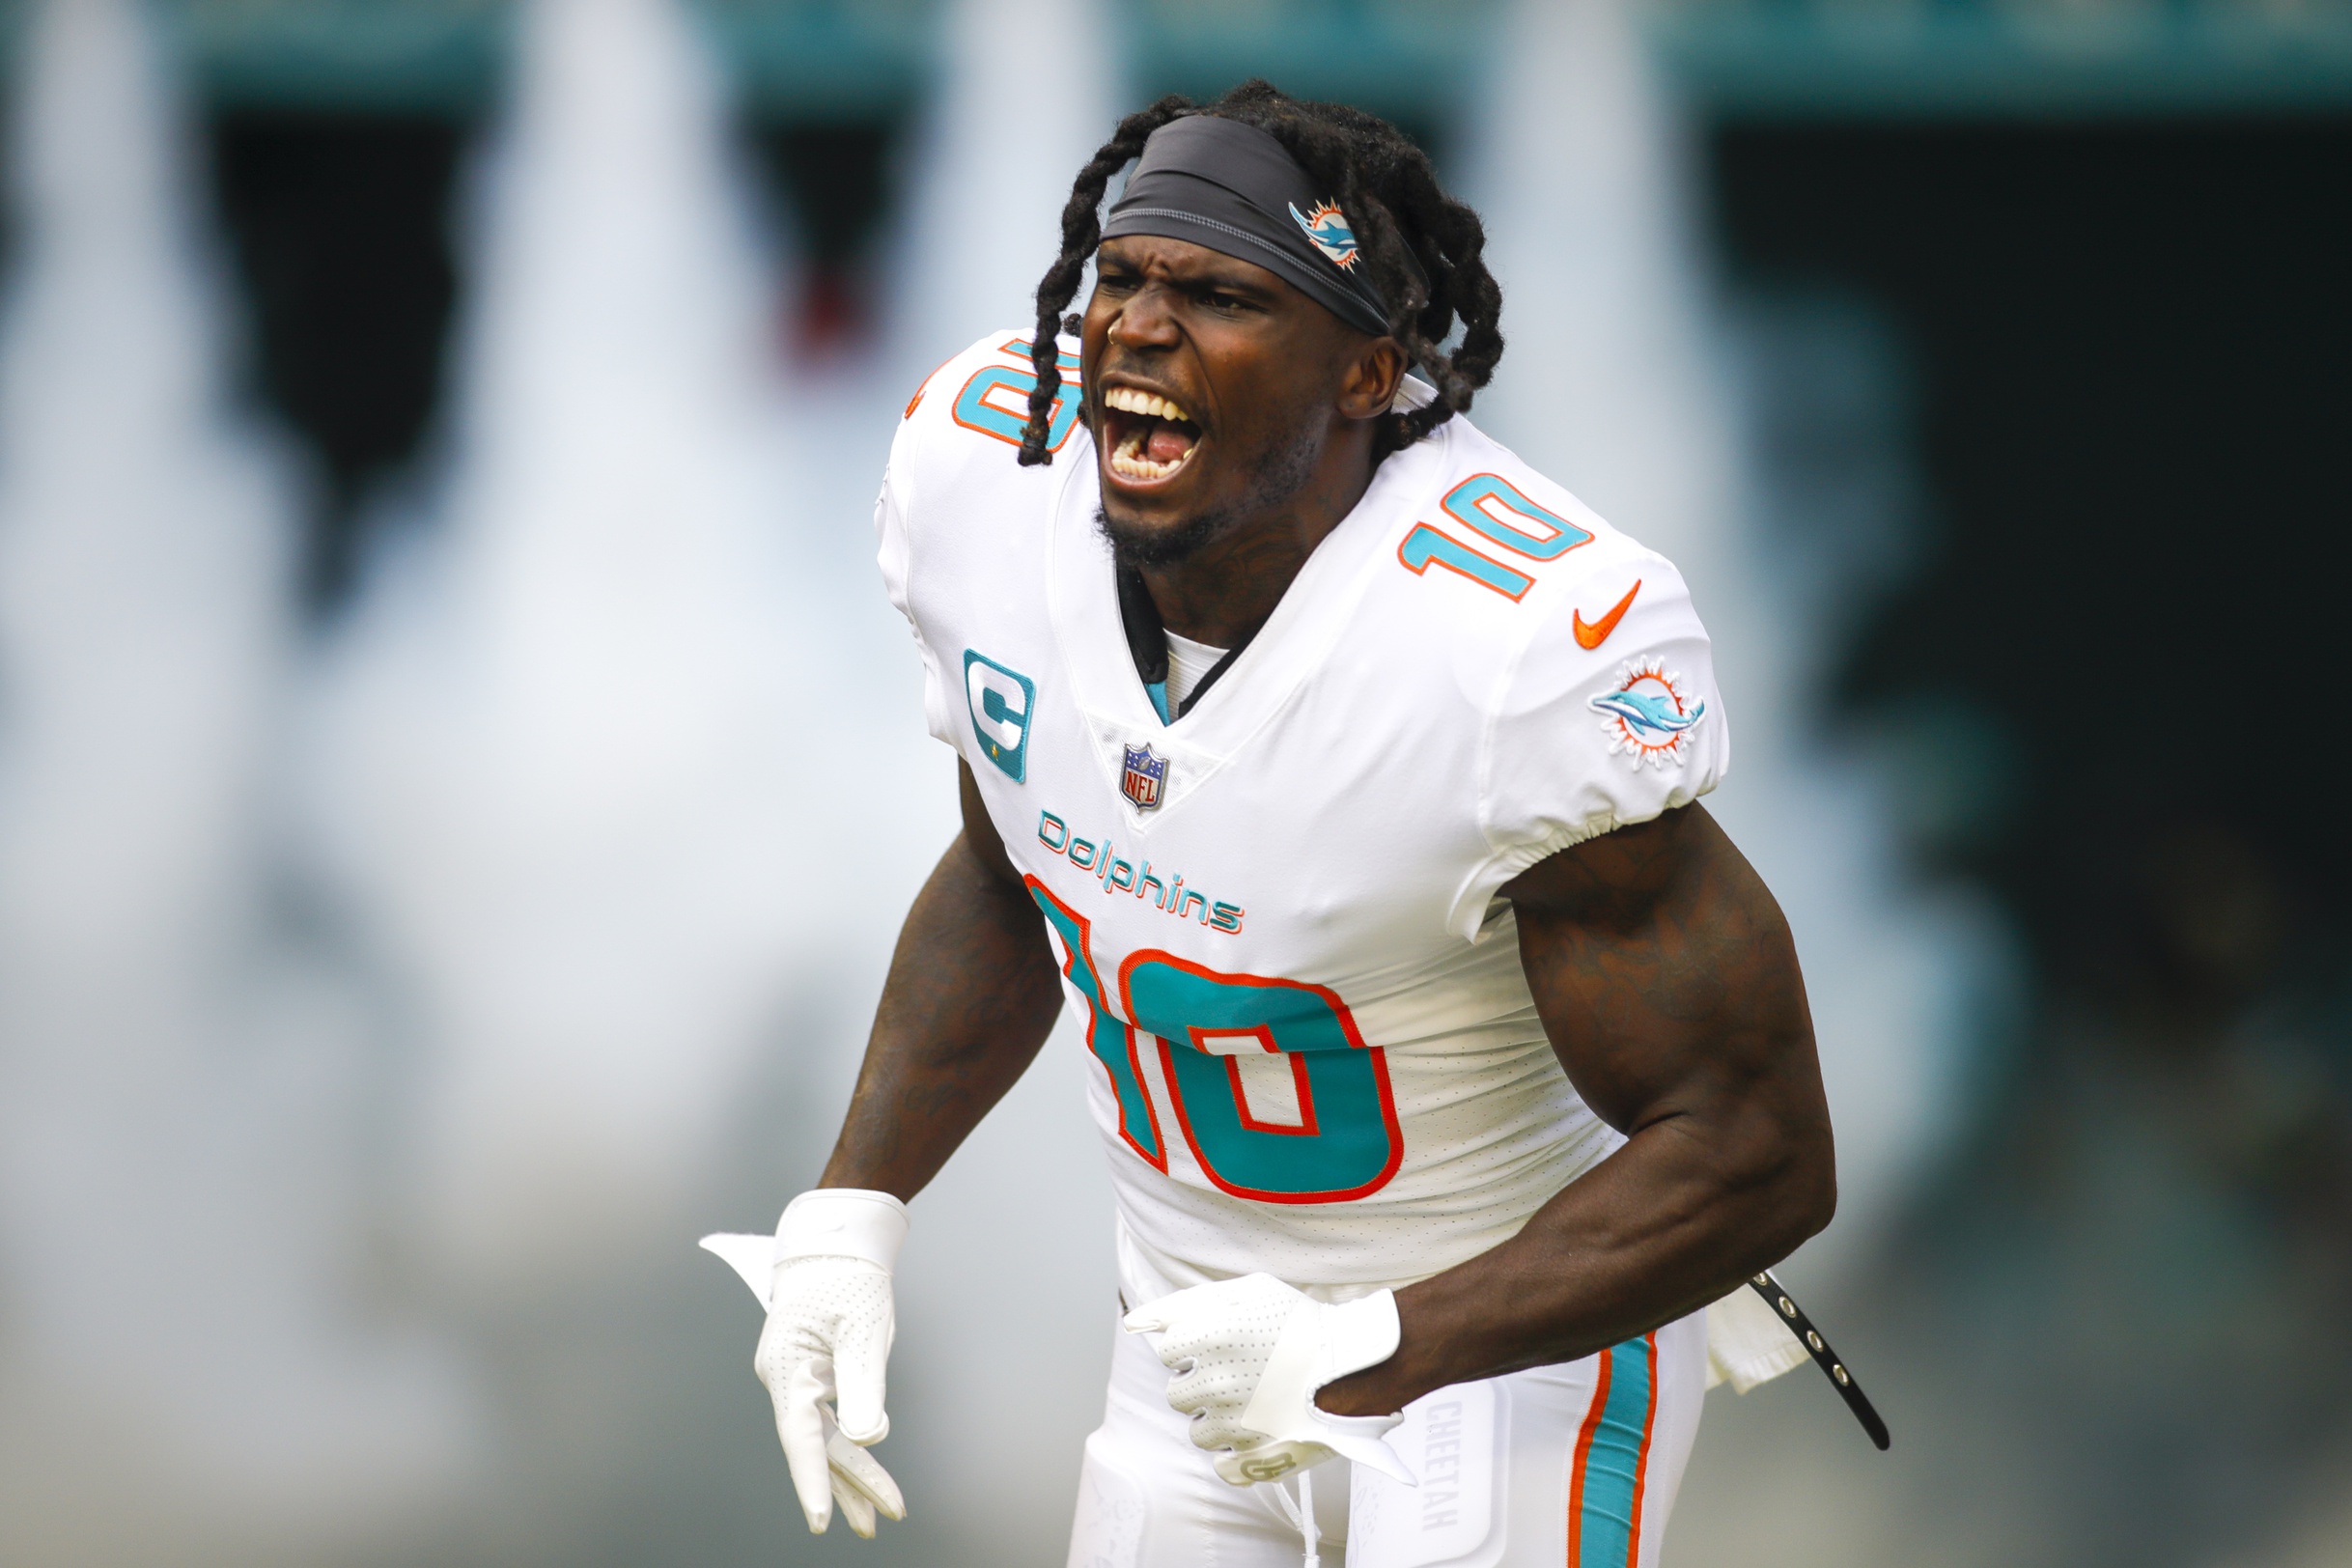 miami dolphins video released today